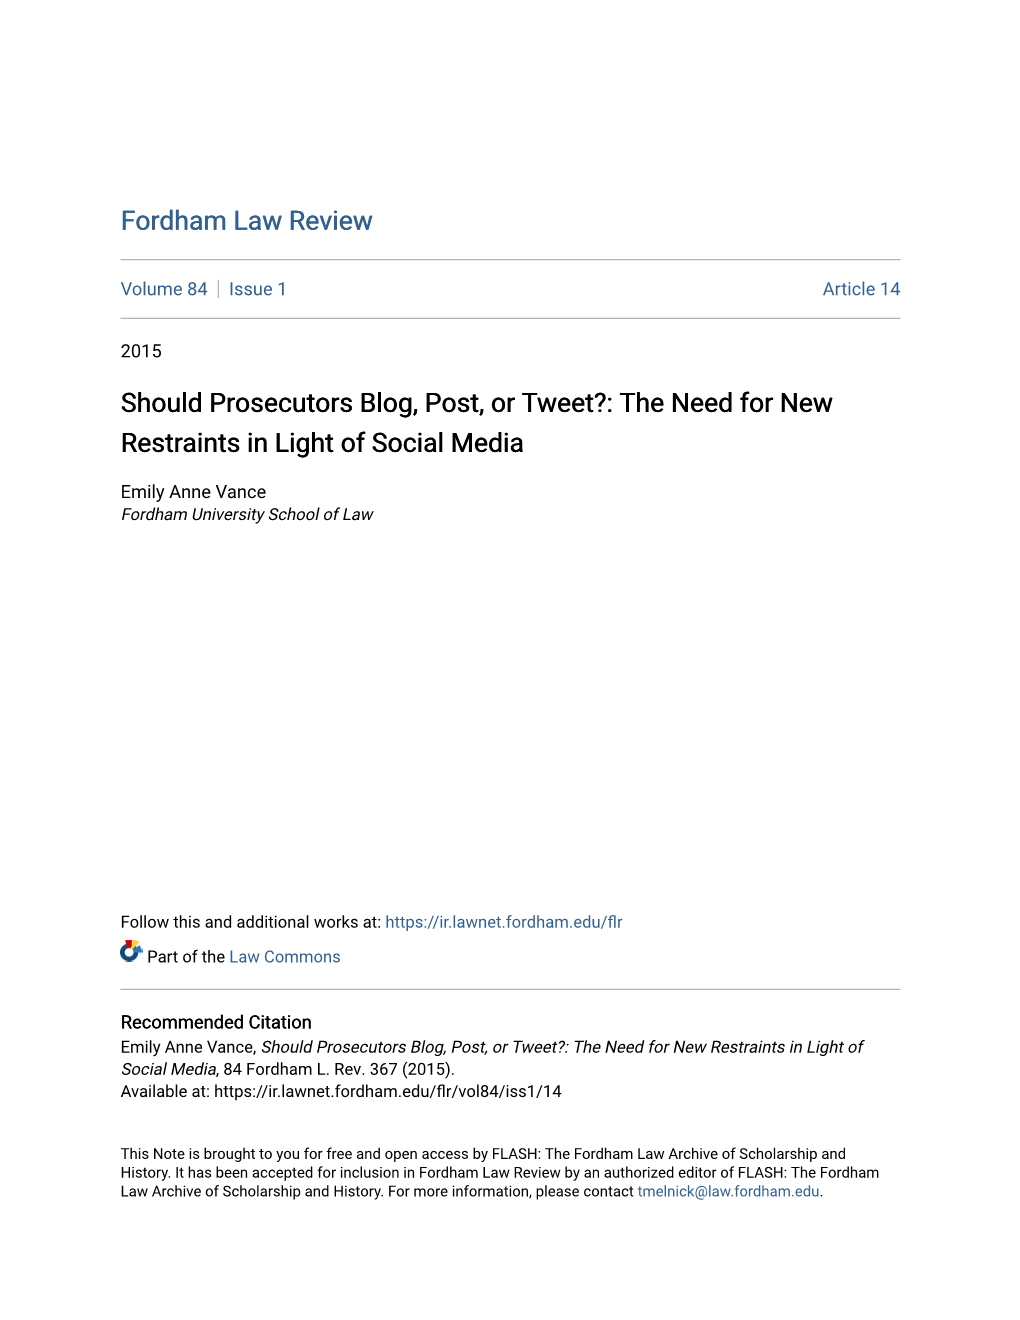 Should Prosecutors Blog, Post, Or Tweet?: the Need for New Restraints in Light of Social Media